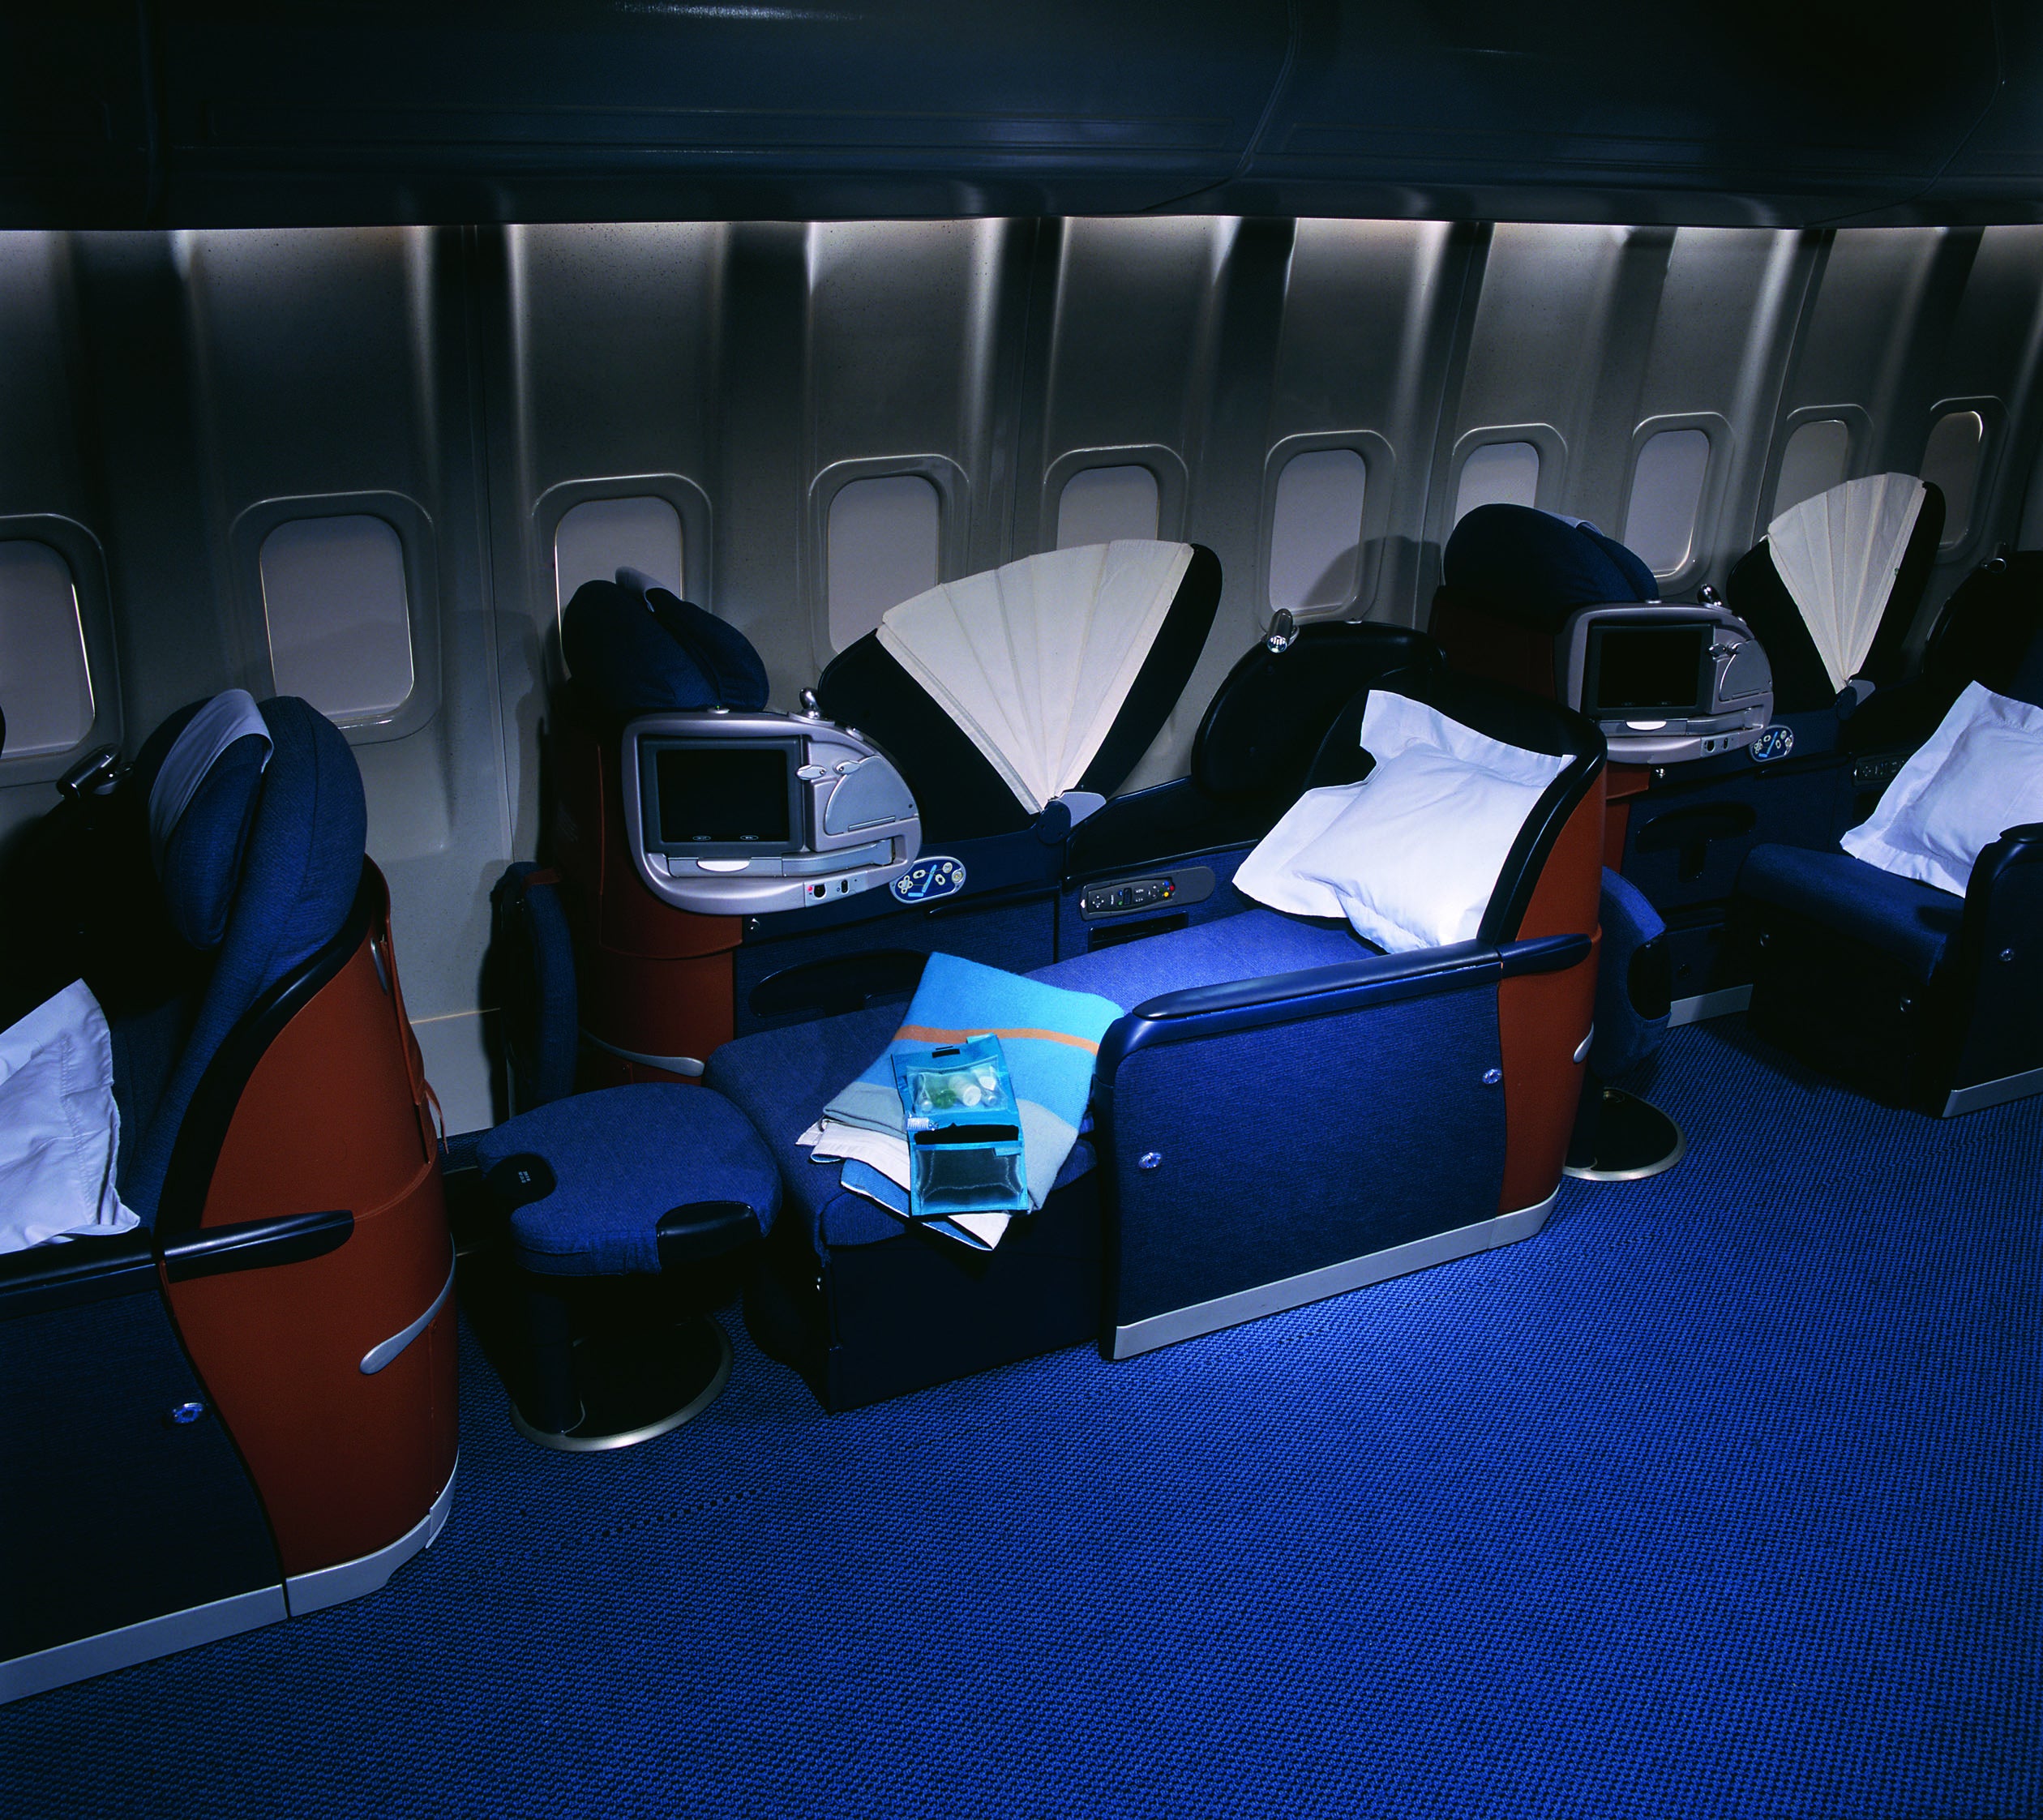 Does British Airways have flatbeds in business class?